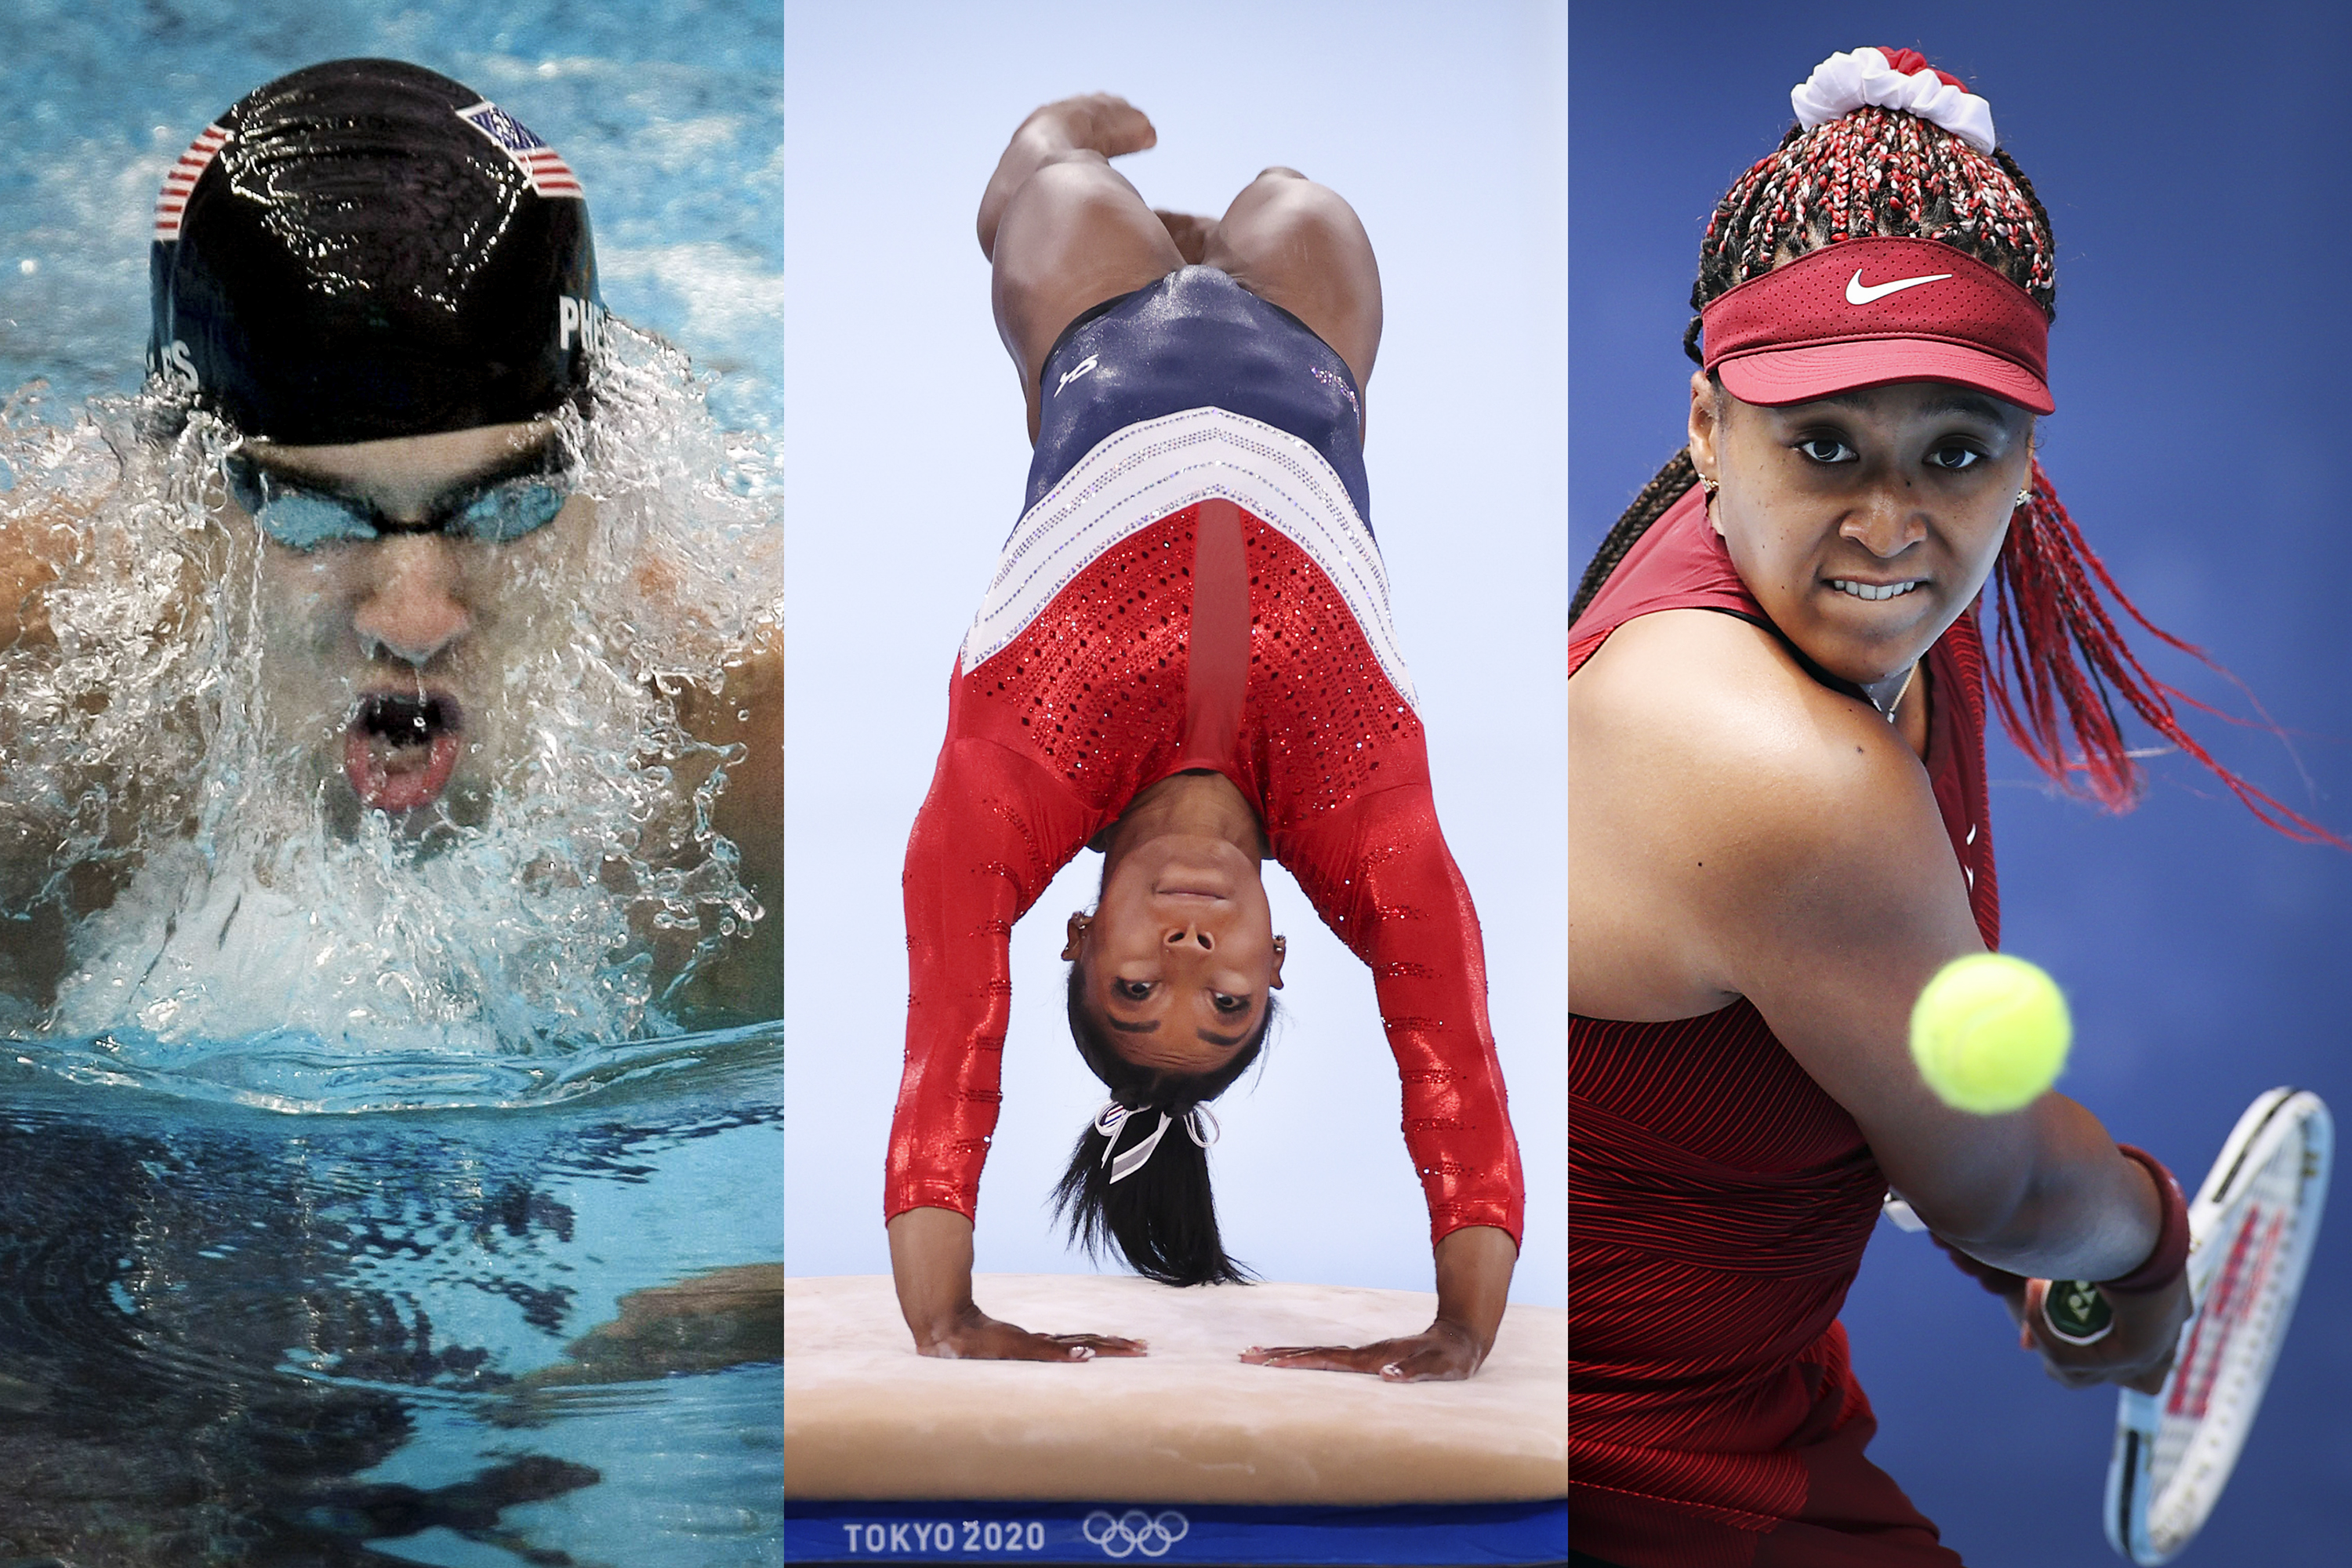 Three panels showing swimmer Michael Phelps in the water, gymnast Simone Biles upside-down on the vault, and tennis player Naomi Osaka making a backhand return.